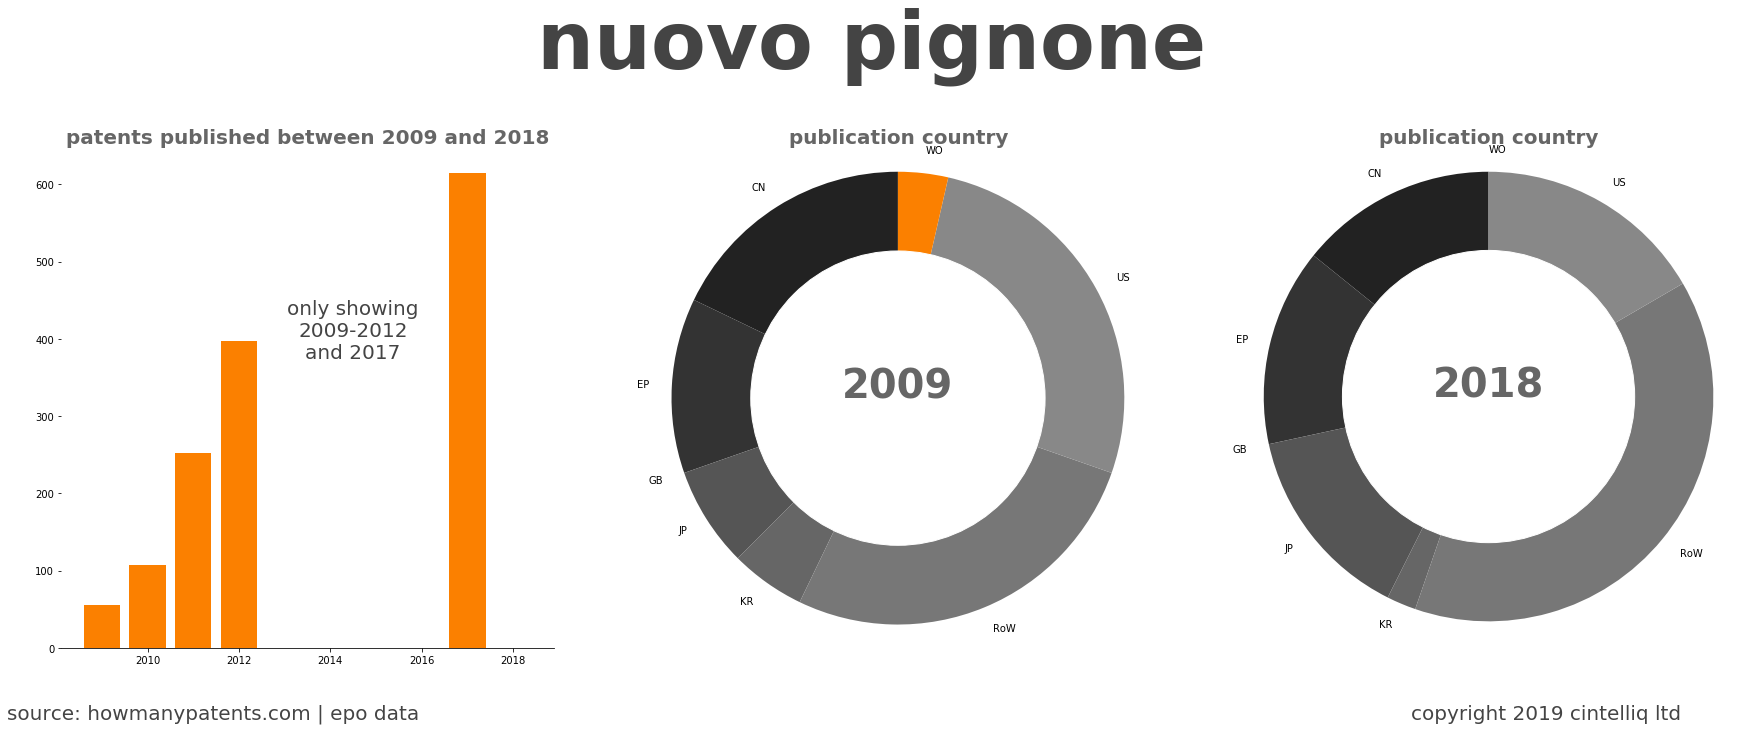 summary of patents for Nuovo Pignone